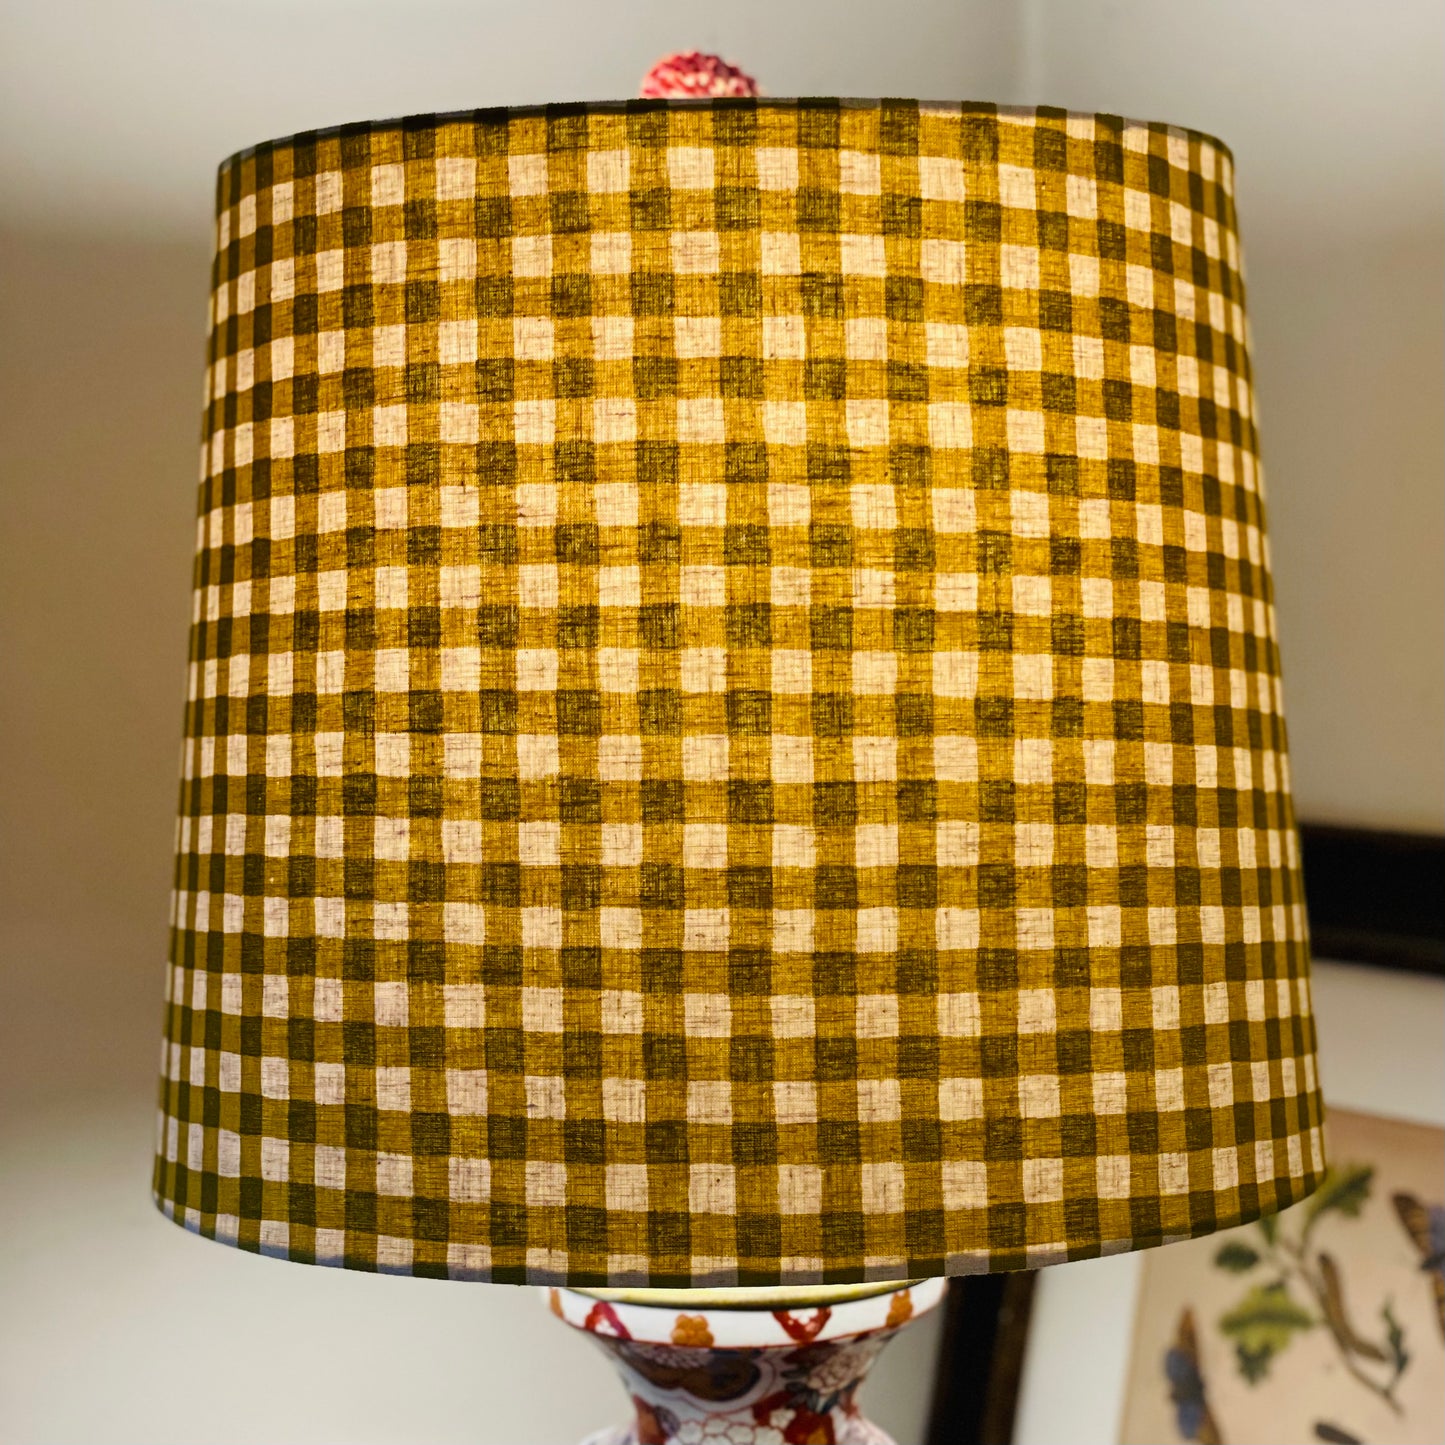 Large Empire Shade. 11.75 x 13.75 x 11.75. Yellow-Green Gingham Cotton-Linen from Japan.